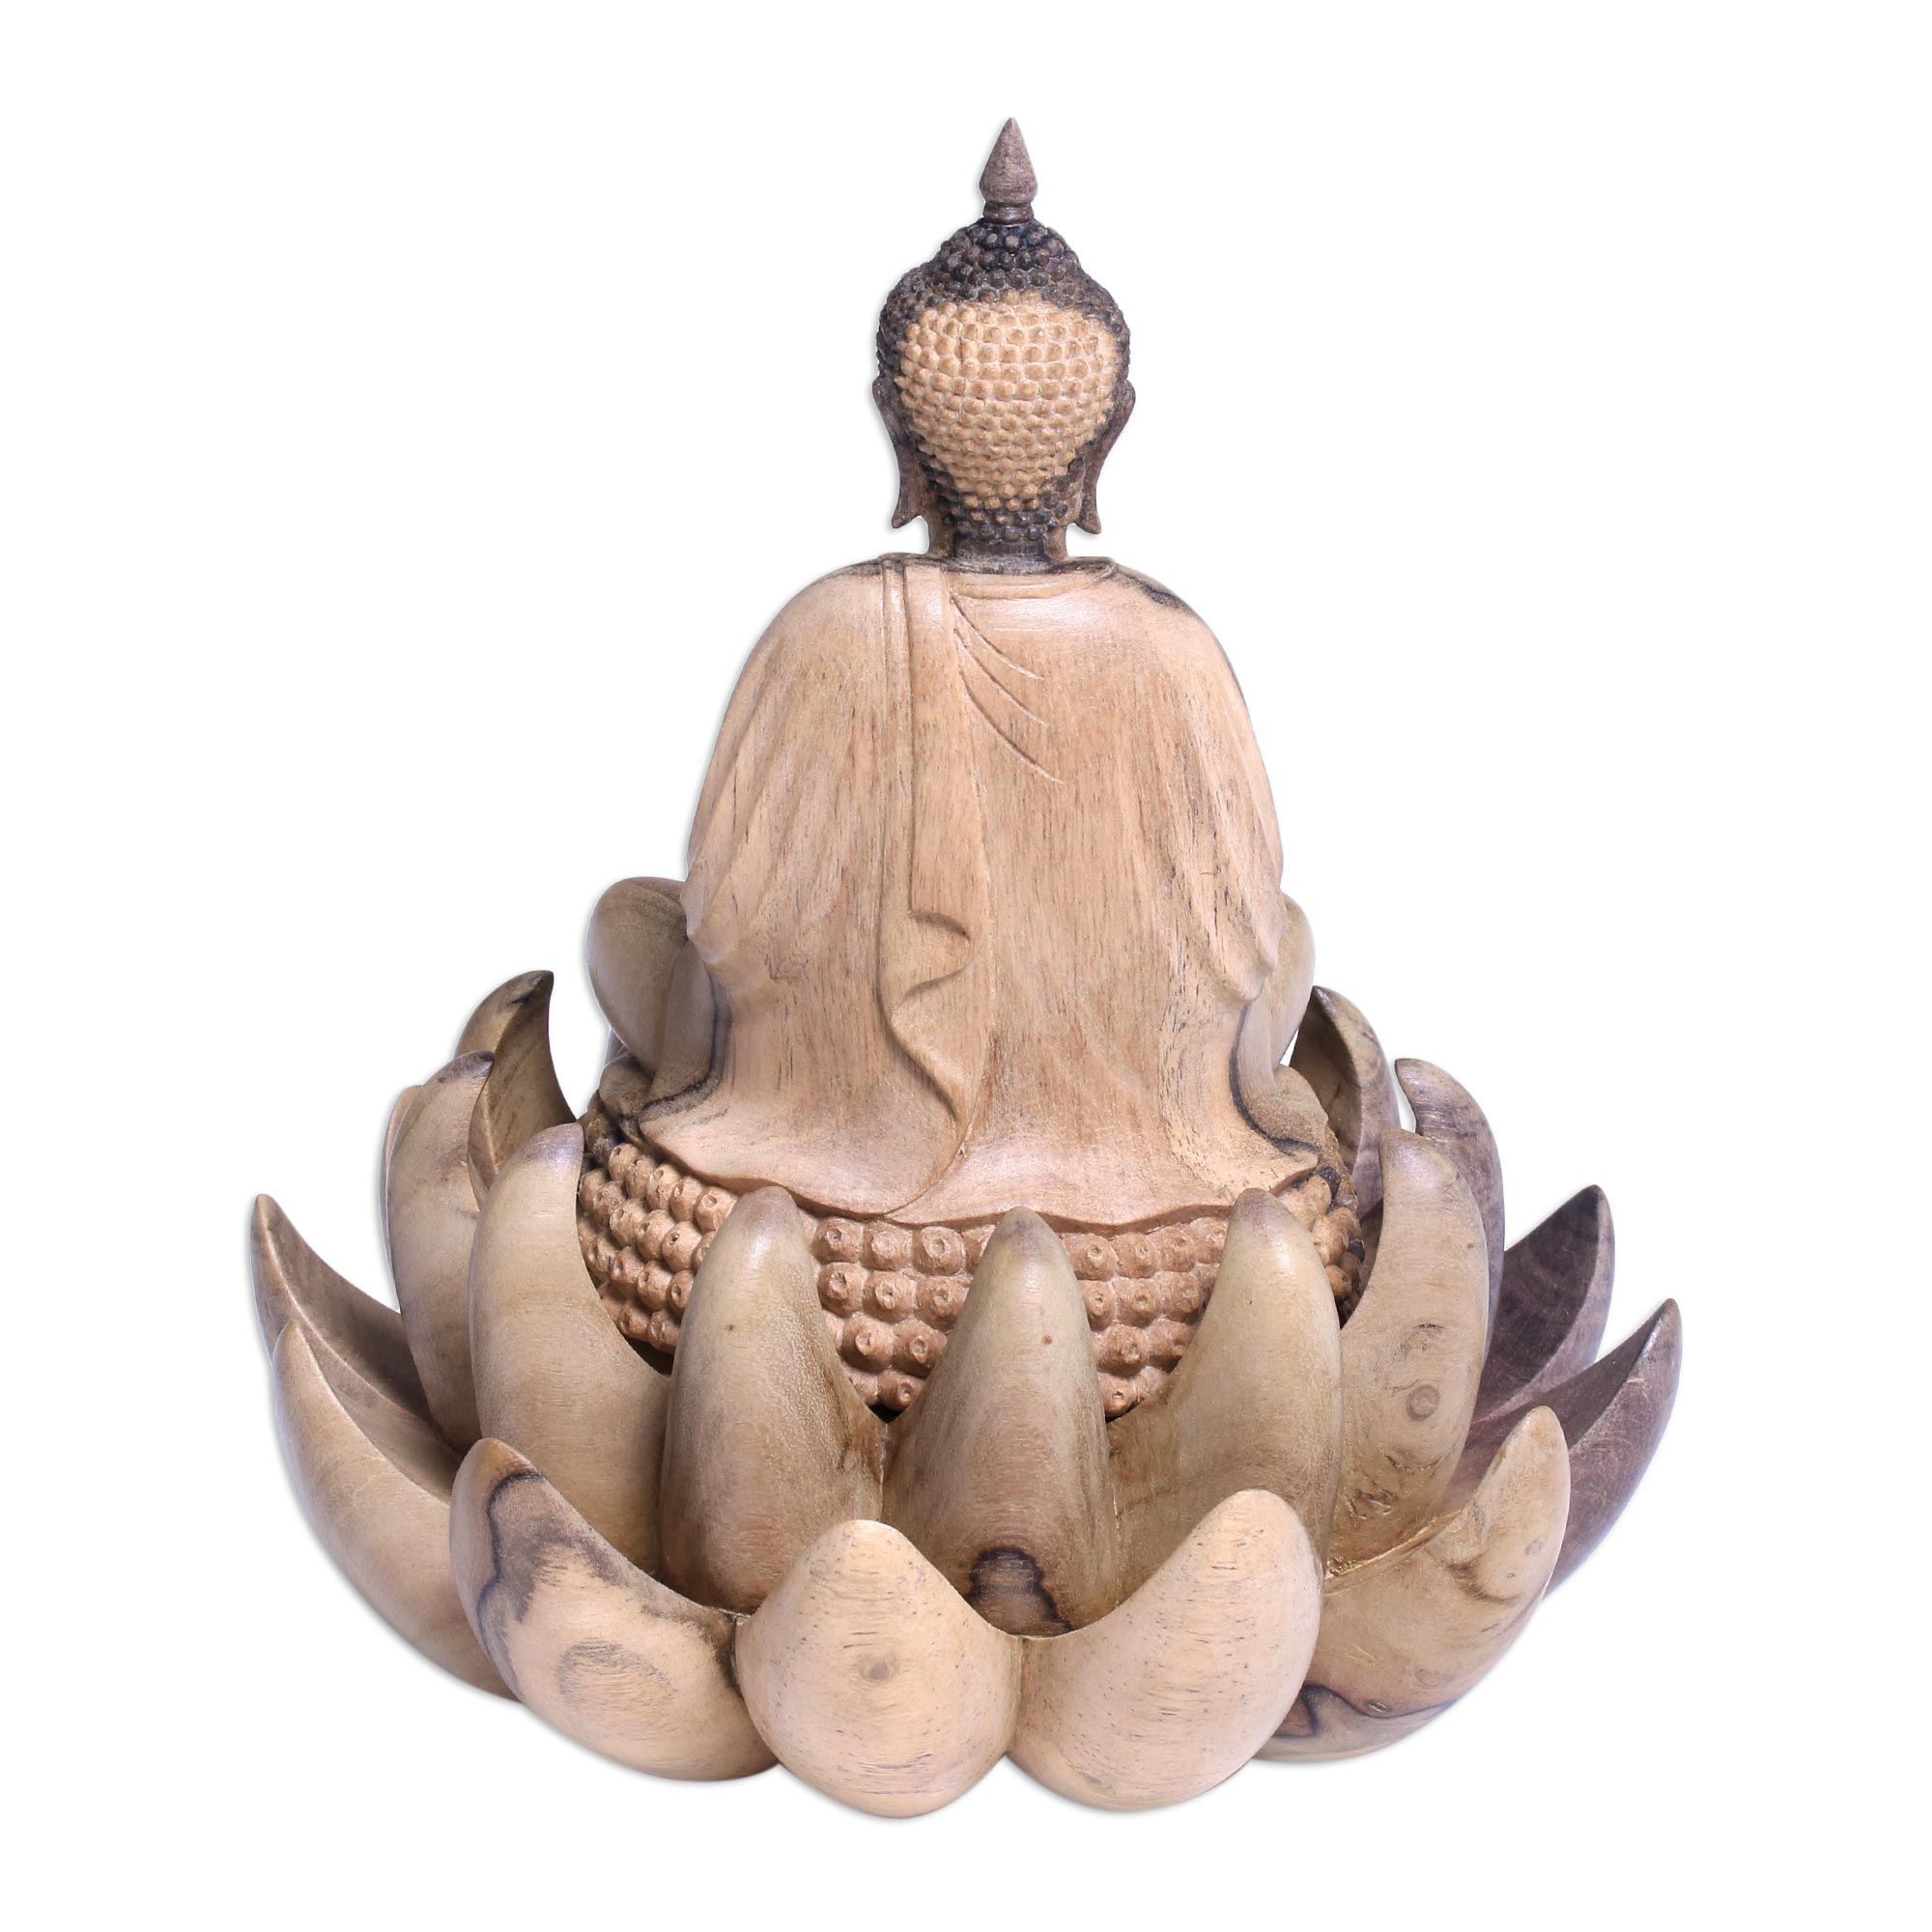 Wood Sculpture of Buddha on a Lotus Flower from Indonesia - Buddha on